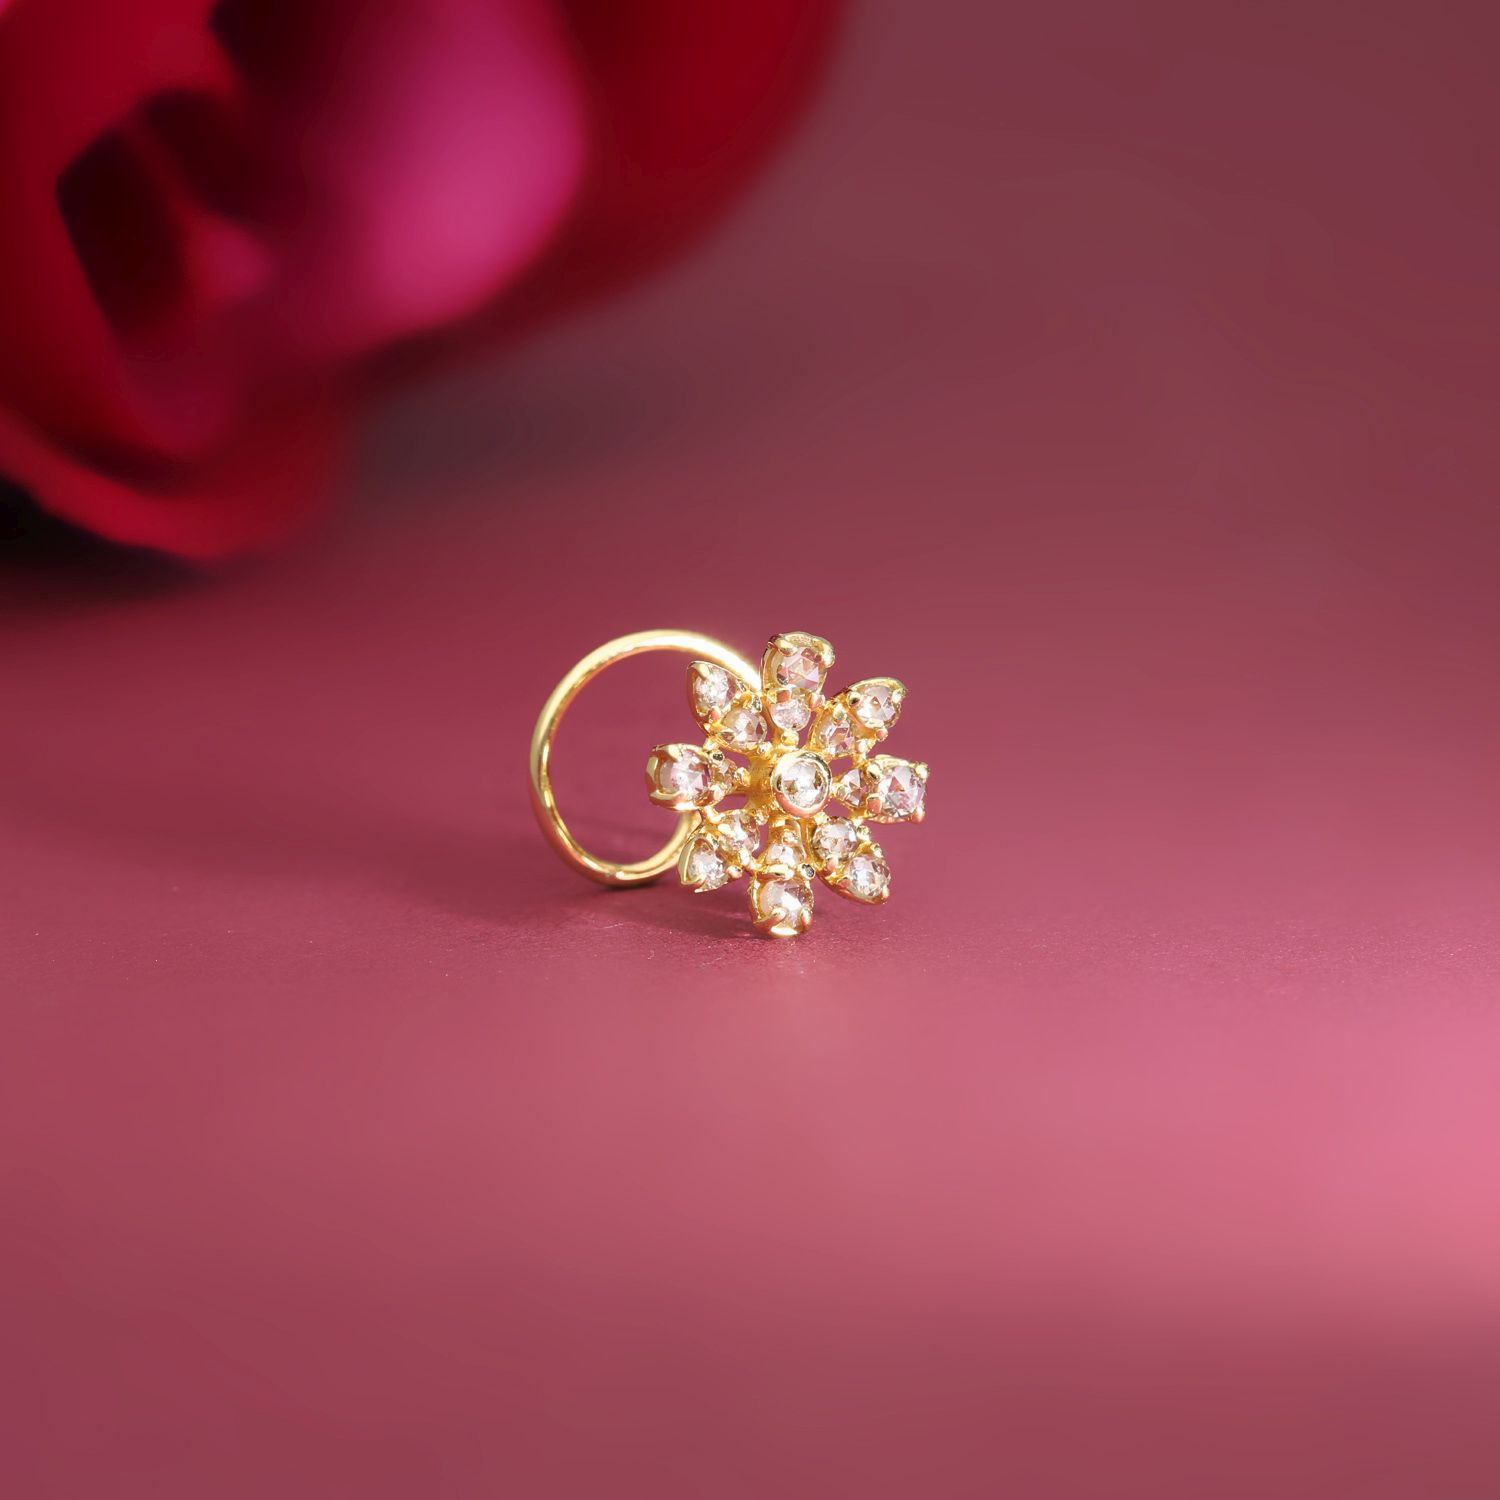 Dashing Flower 18 KT Gold Nose Pin with Diamonds